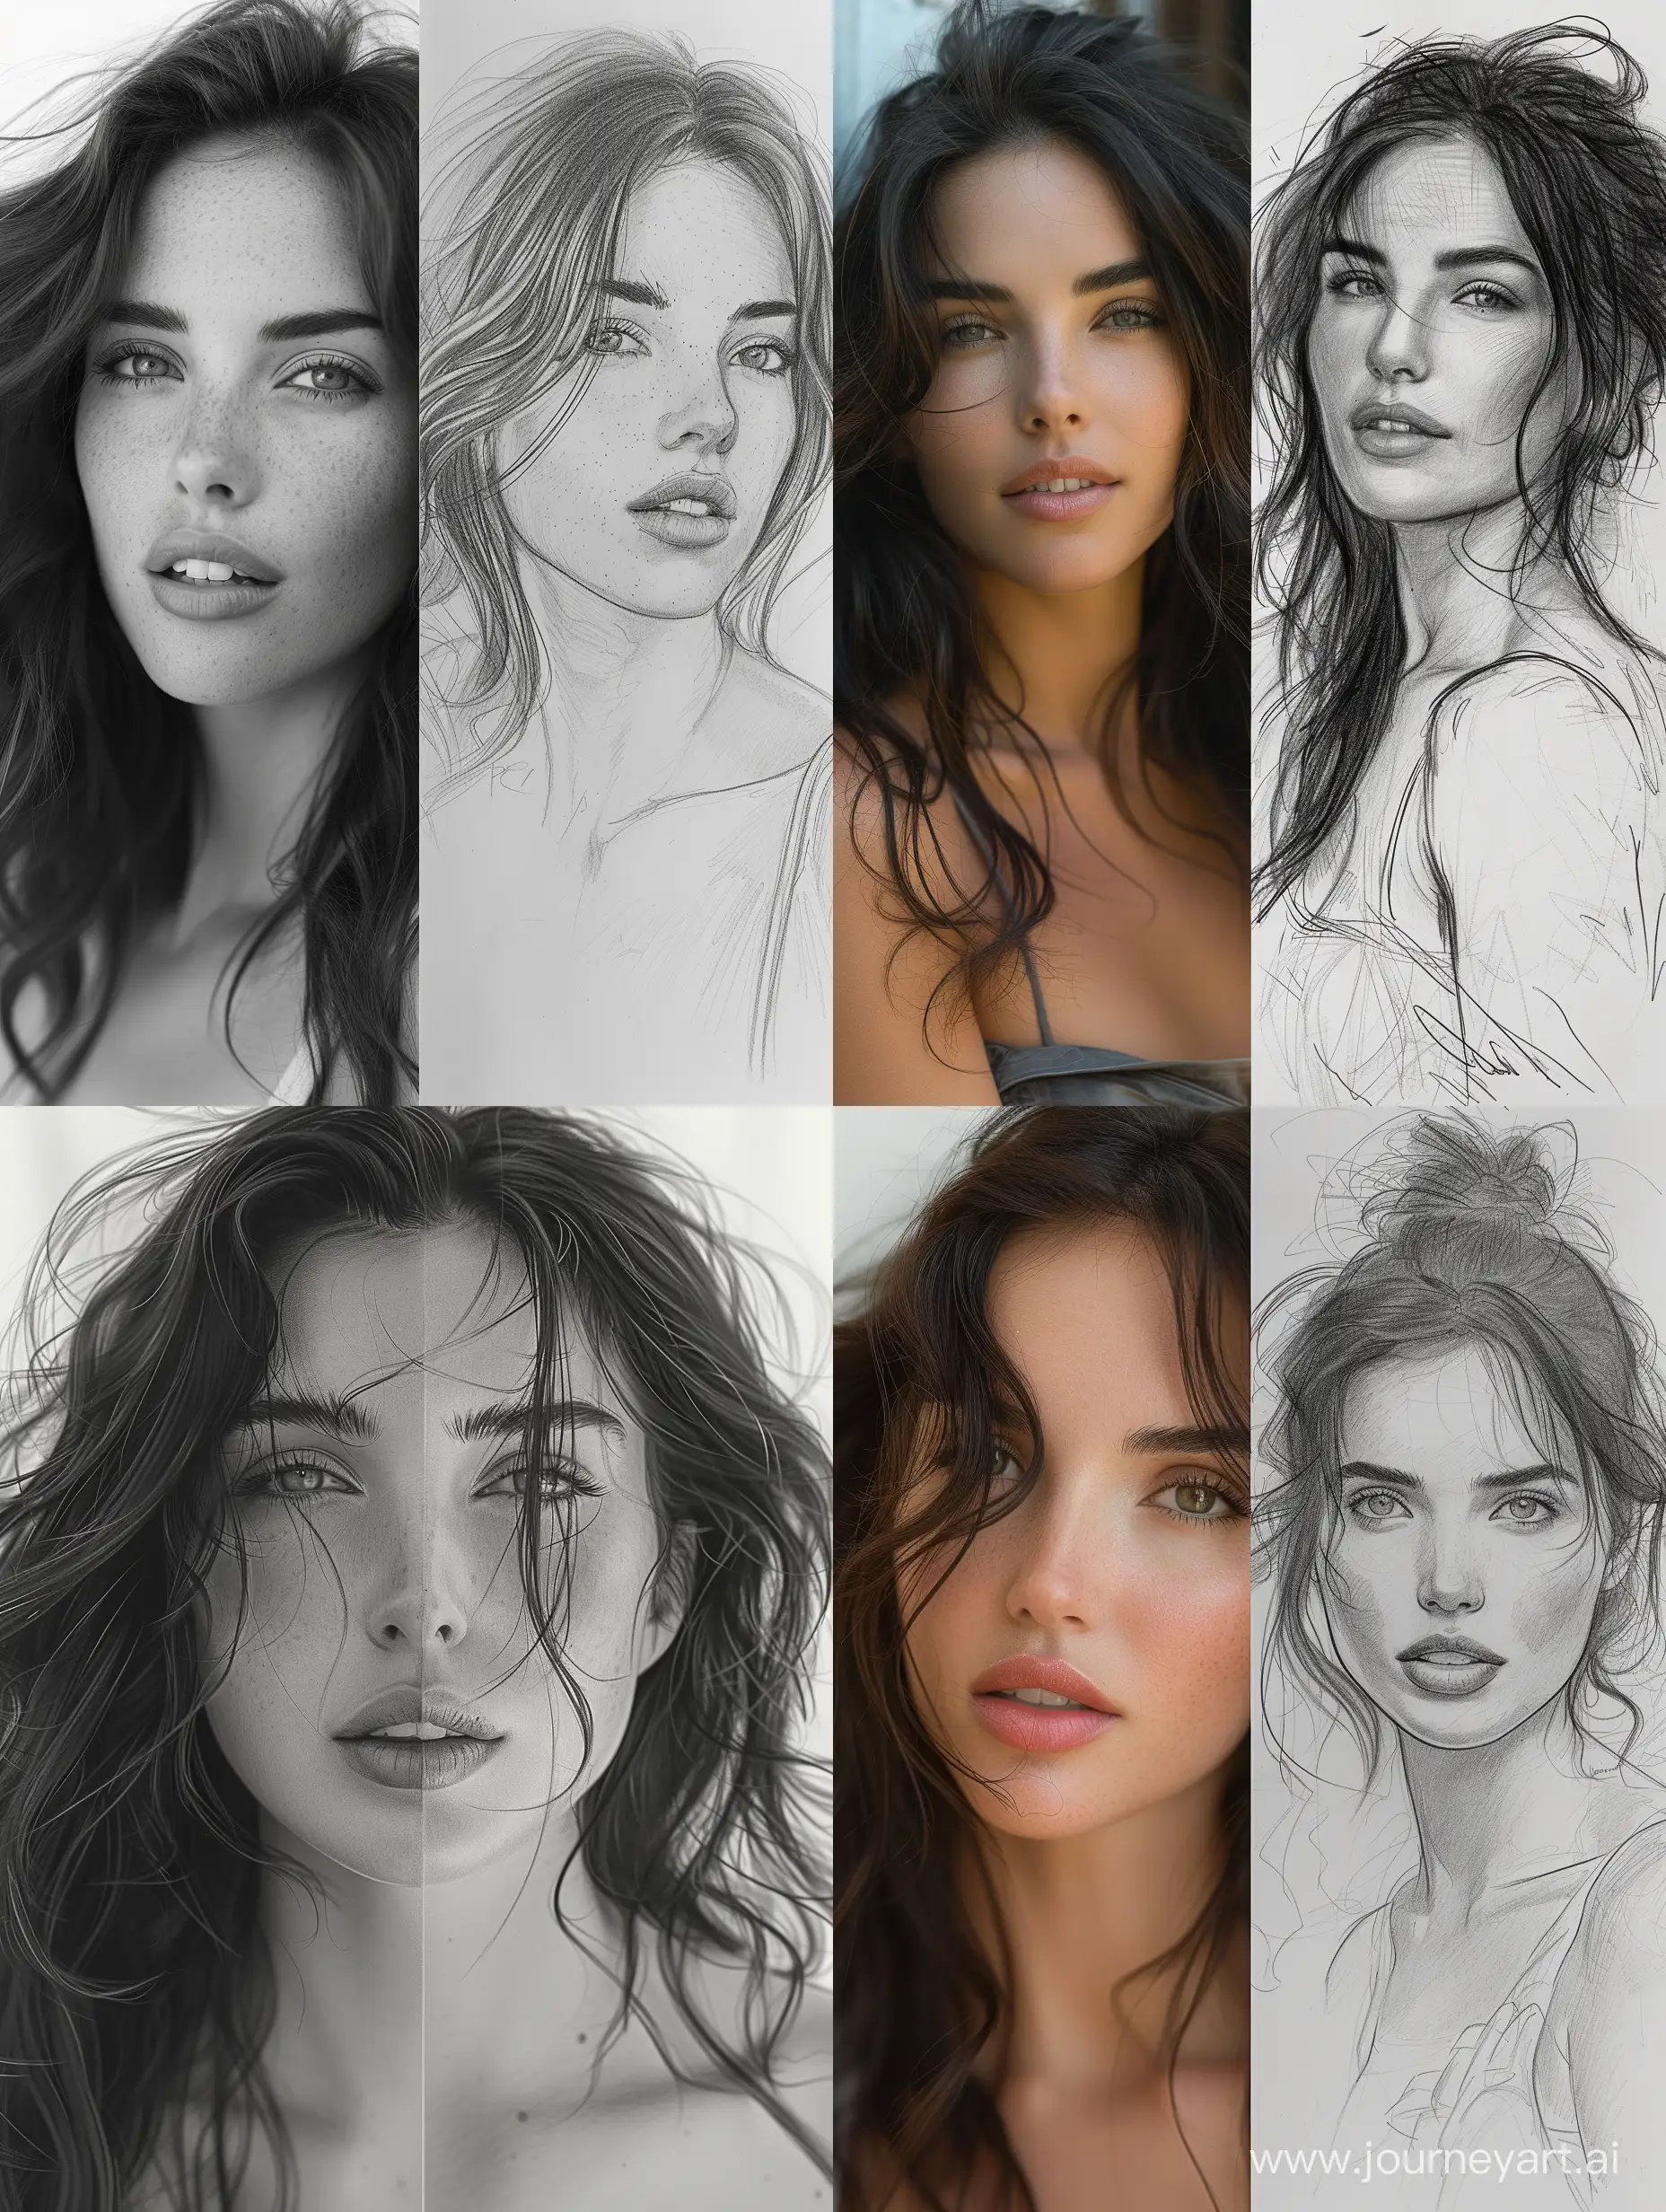 Morning-Fresh-Beauty-Realistic-Portrait-and-Pencil-Sketch-Split-Image